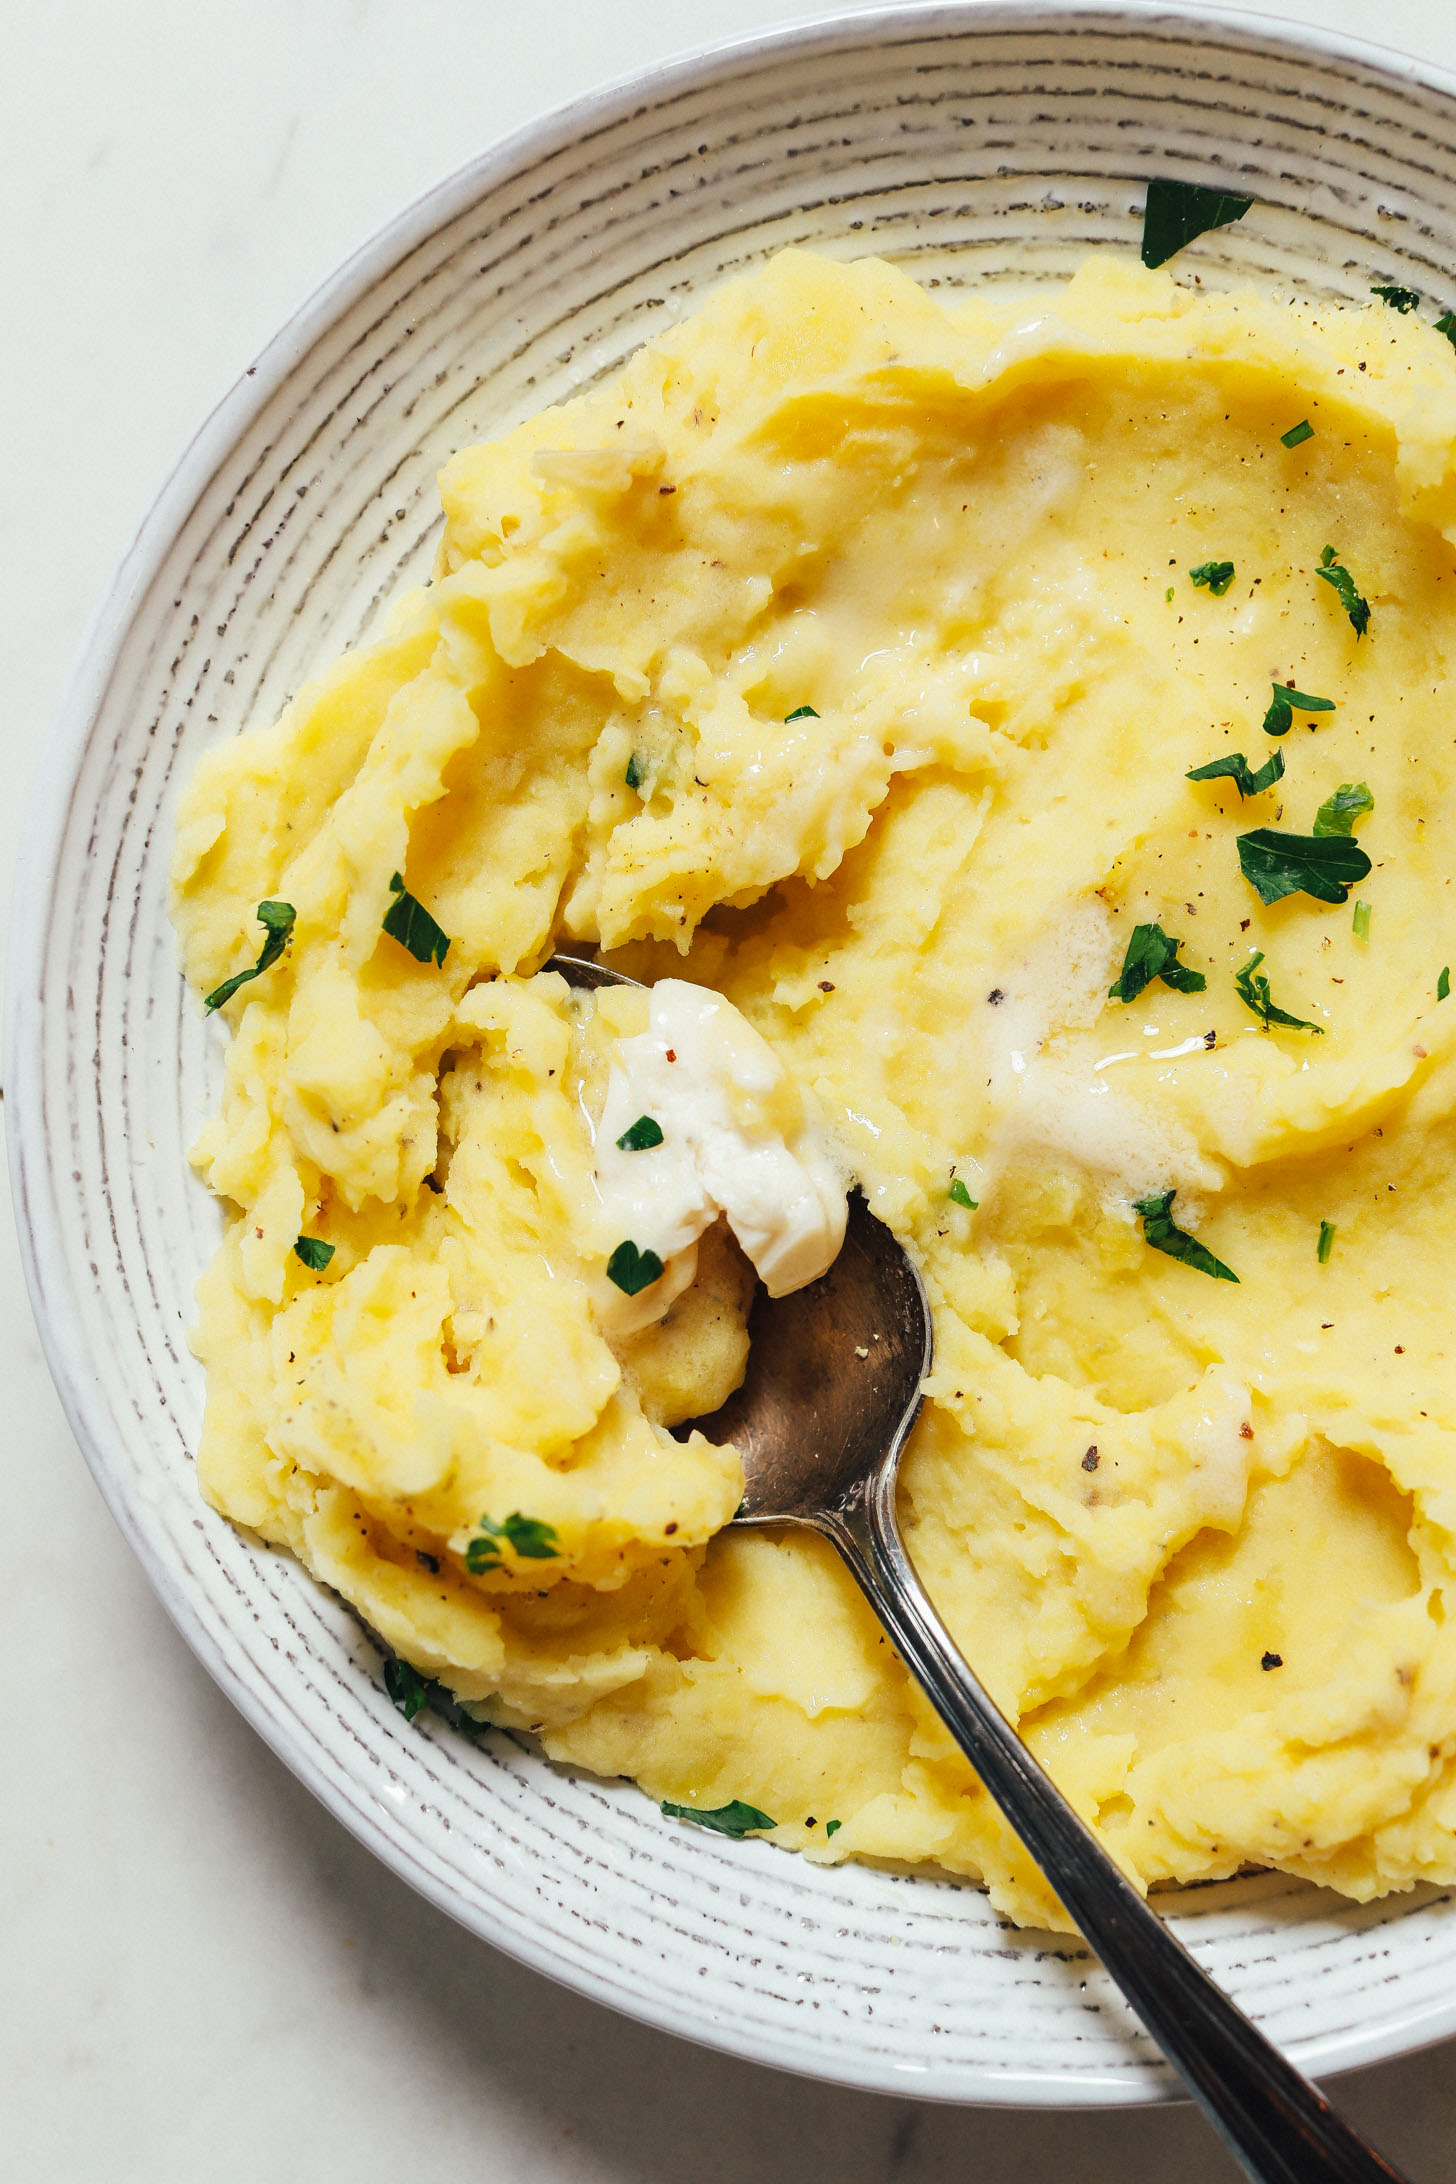 Spoon resting in a bowl of creamy no drain Instant Pot mashed potatoes